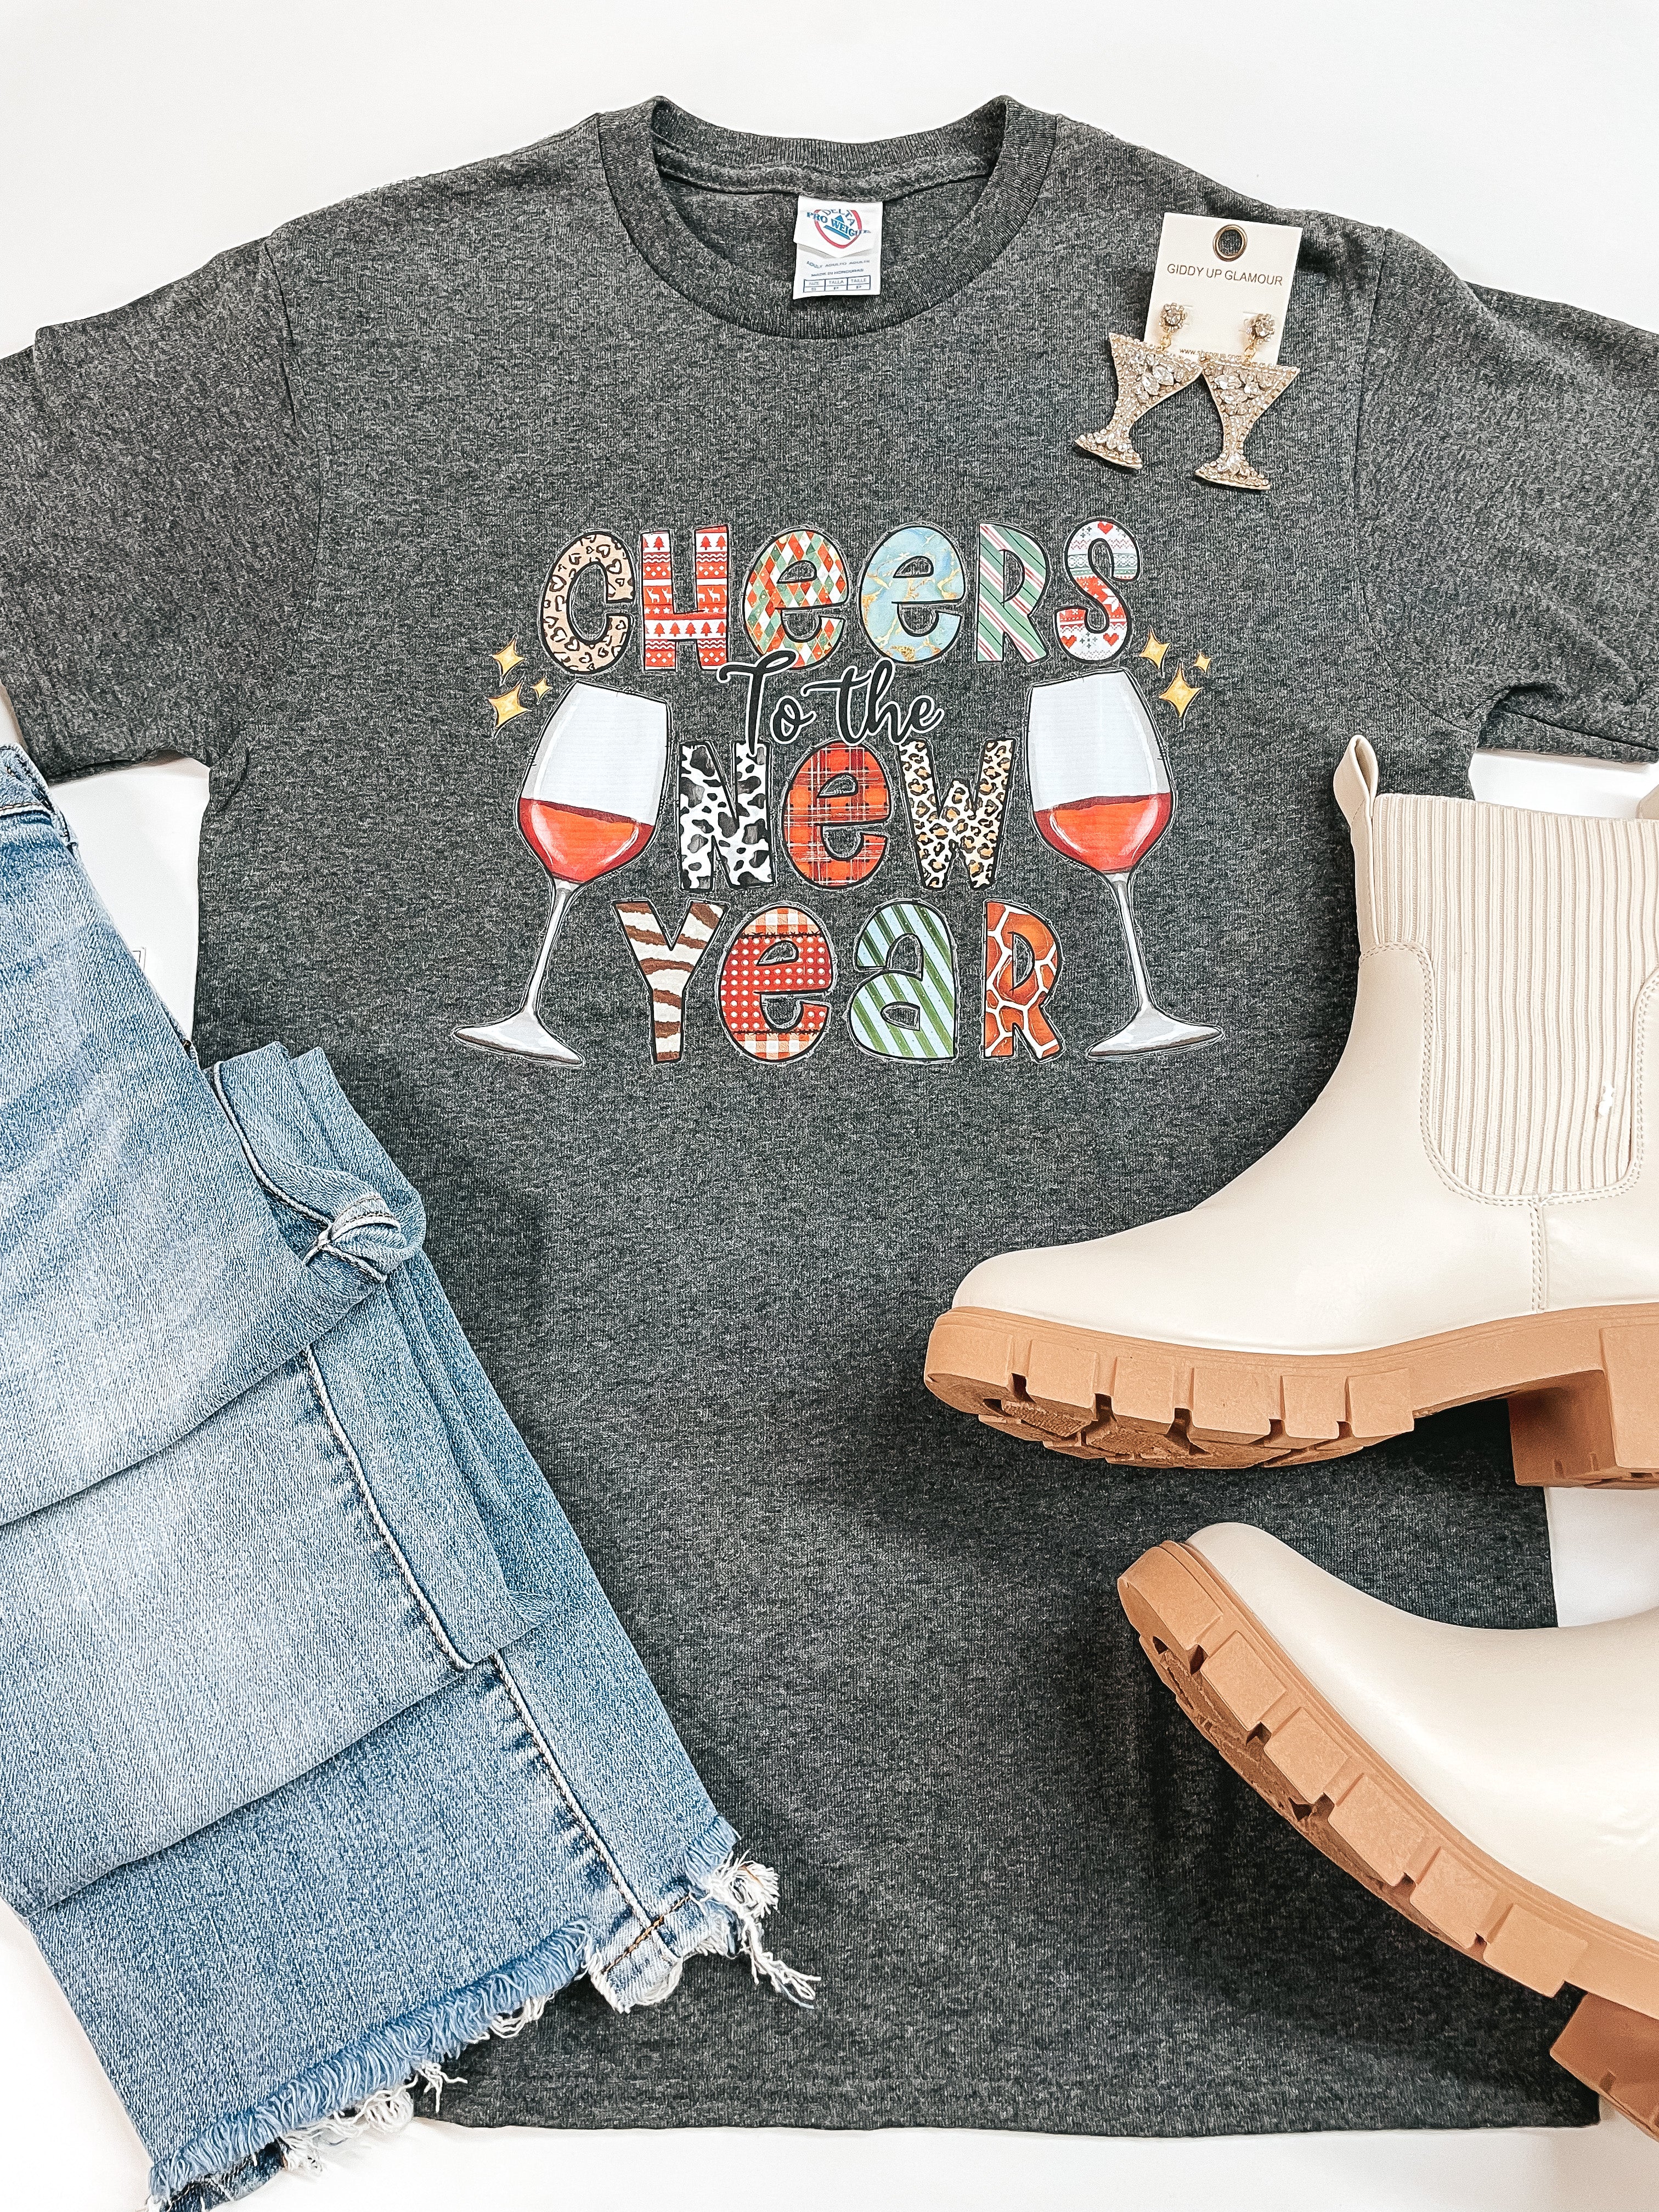 Cheers To The New Year Short Sleeve Graphic Tee in Charcoal Grey - Giddy Up Glamour Boutique